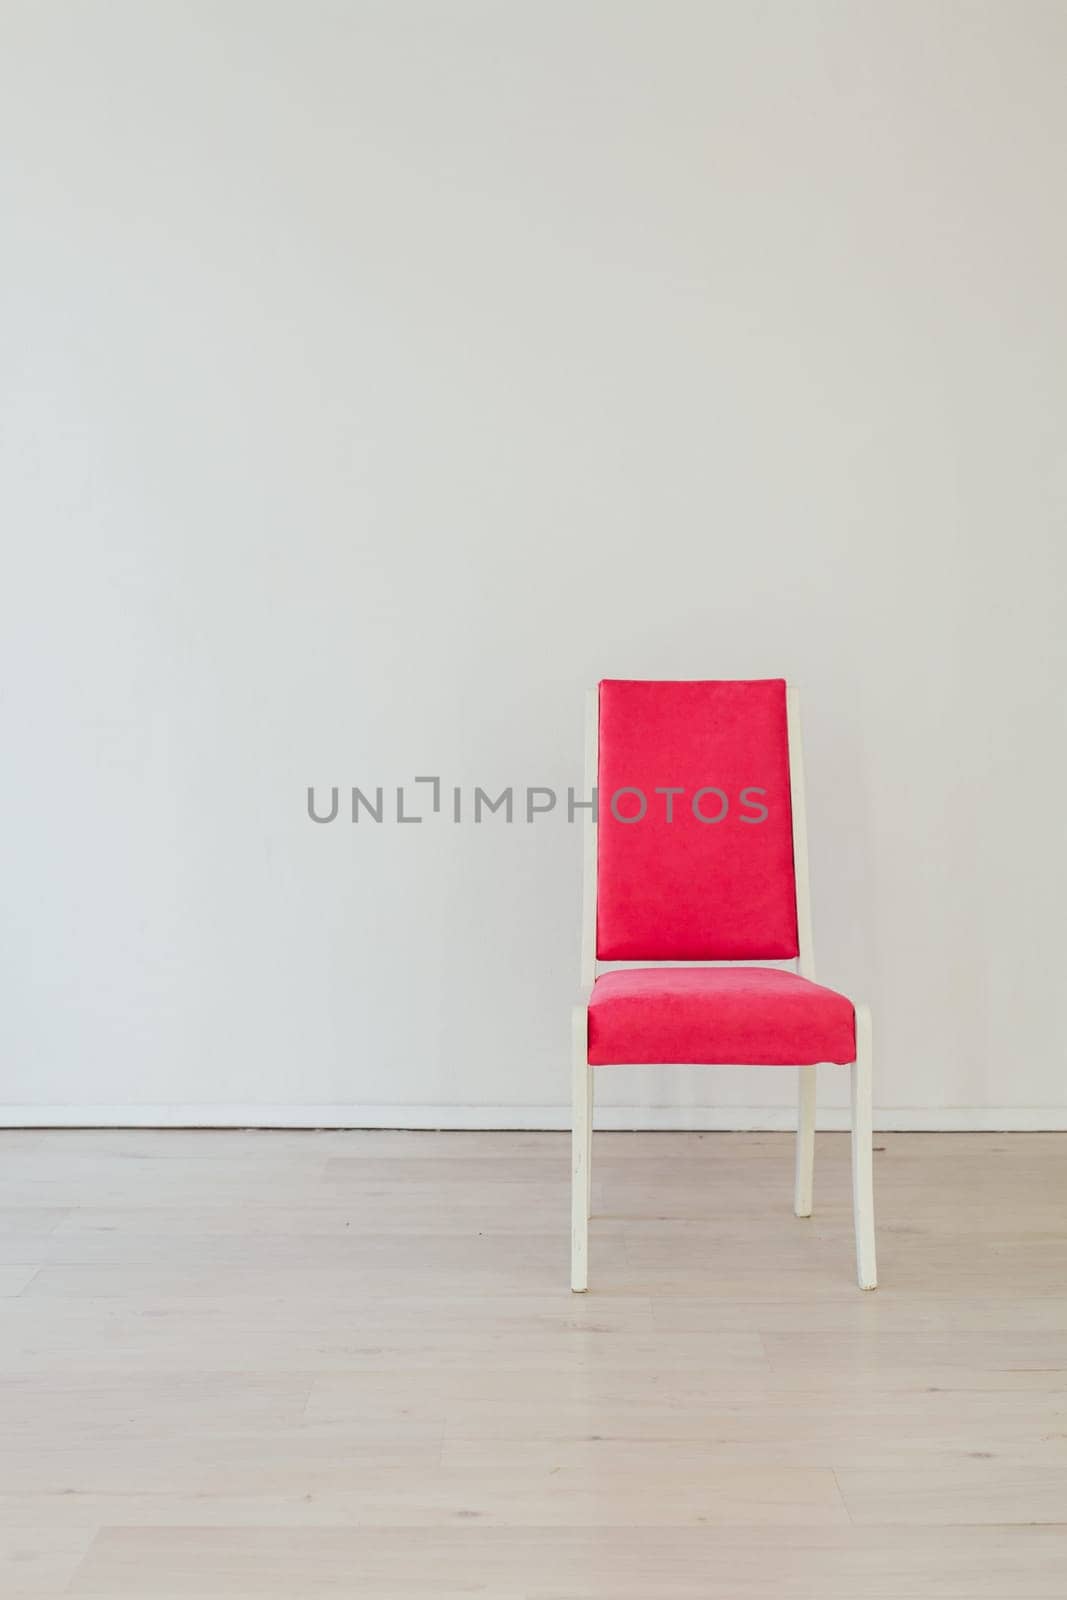 one pink vintage chair in an empty white room by Simakov